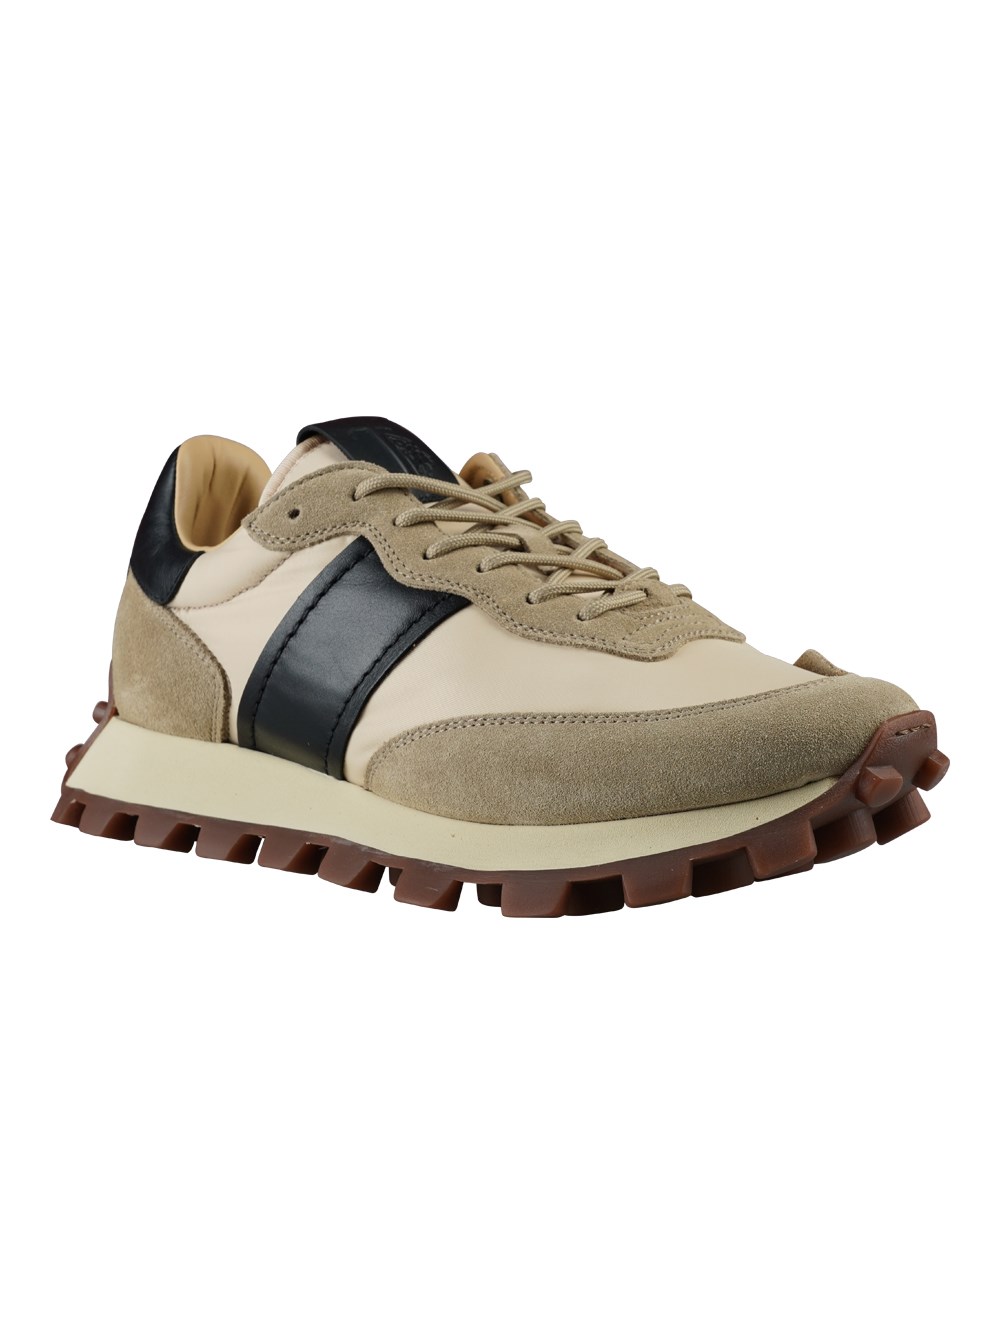 grind voering opraken tod`s SNEAKERS available on montiboutique.com - 51204